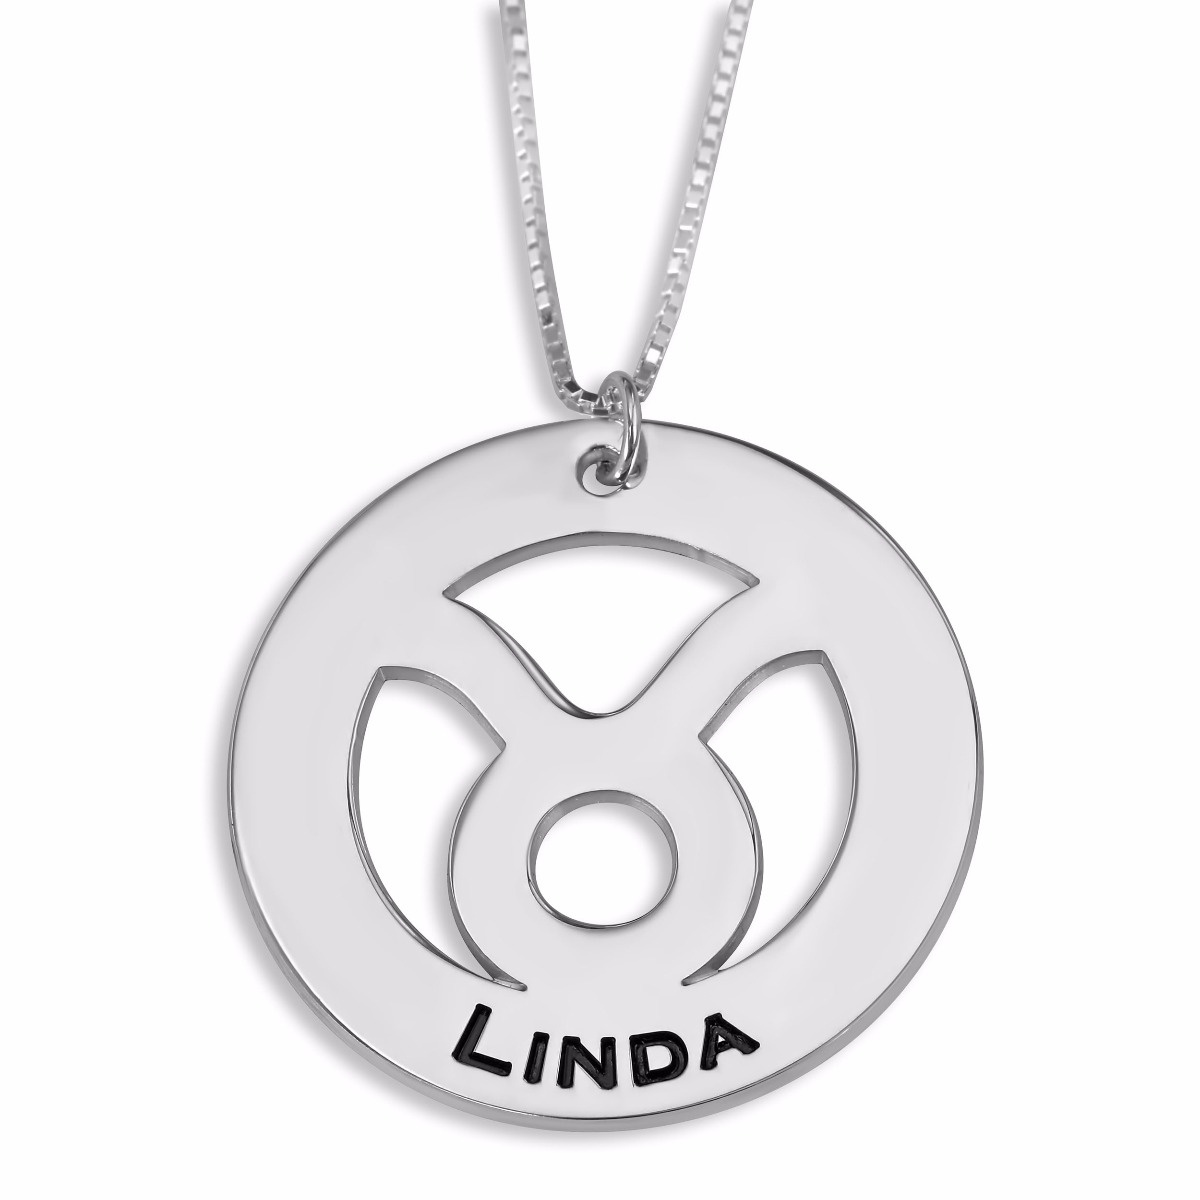 Hebrew Name Necklace Double Thickness Silver Taurus Zodiac Name Necklace (English/Hebrew)  - 1